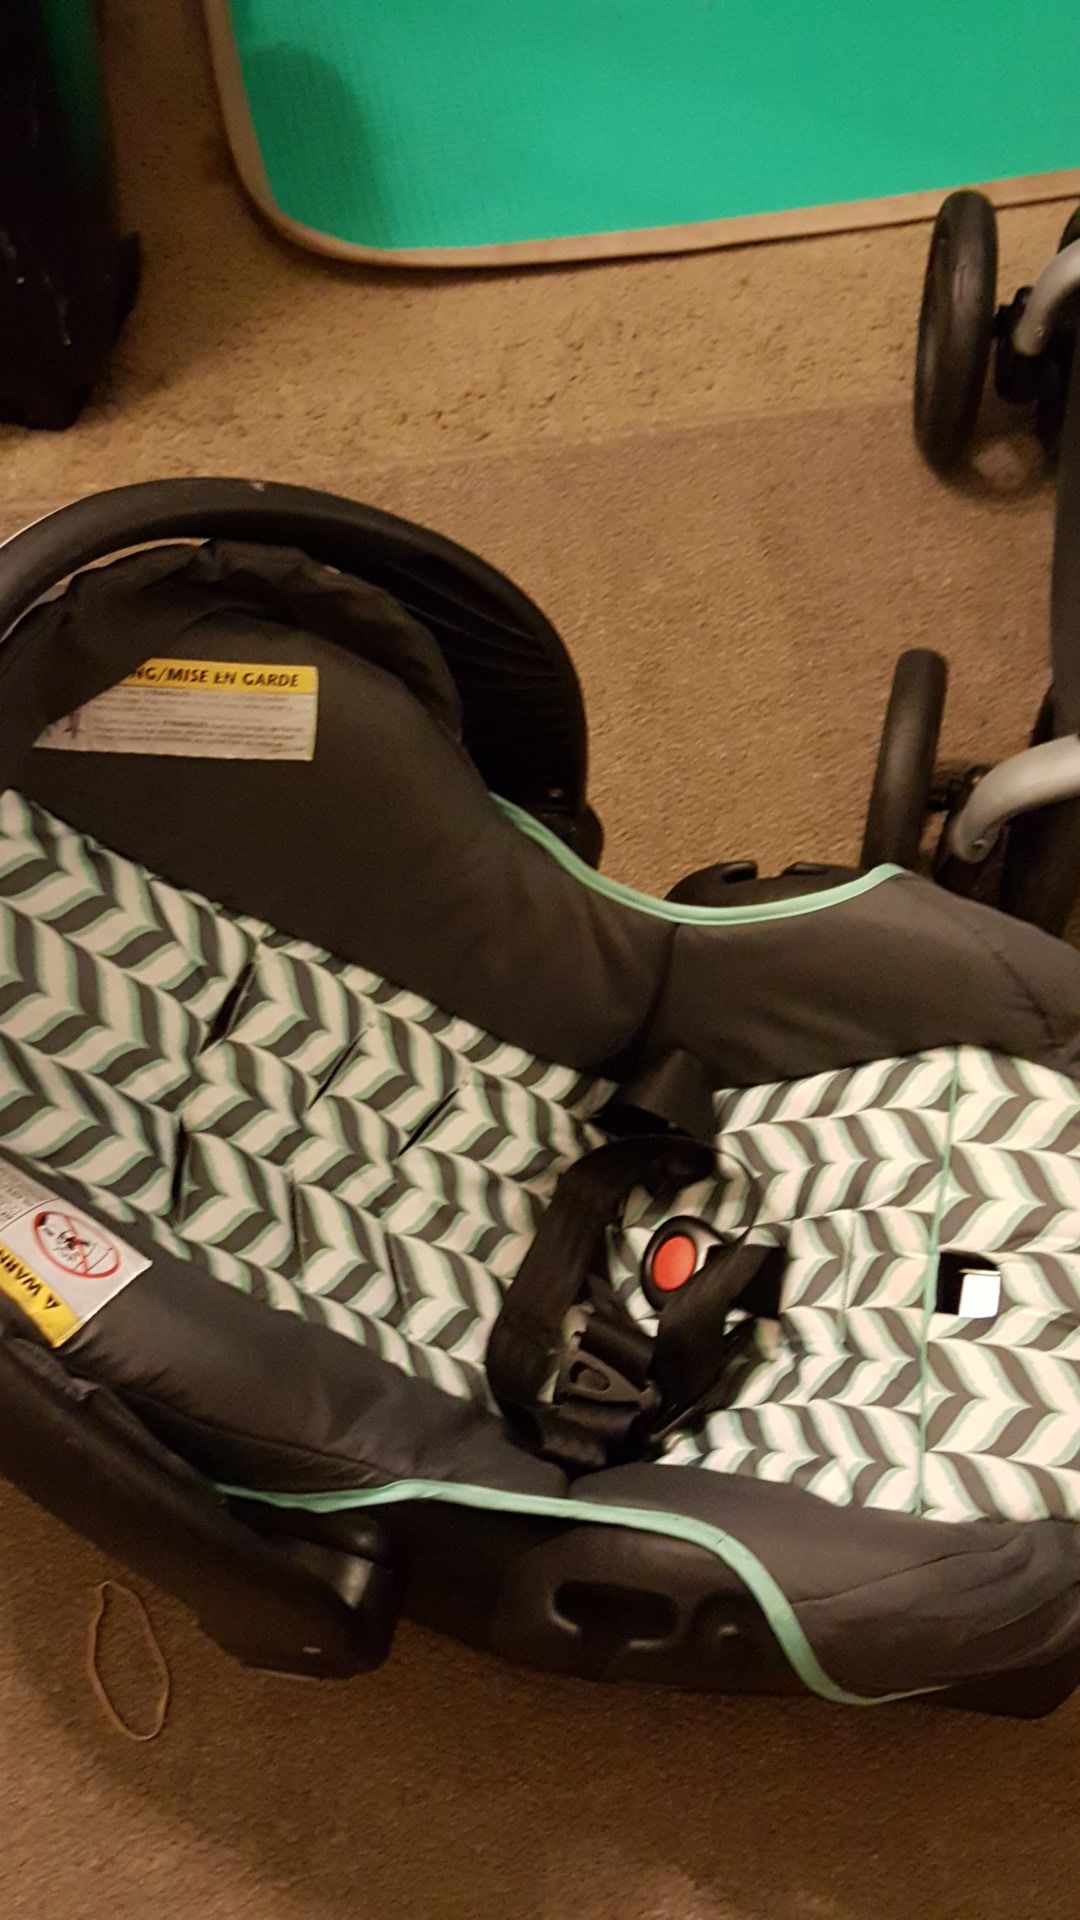 Baby carseat and stroller